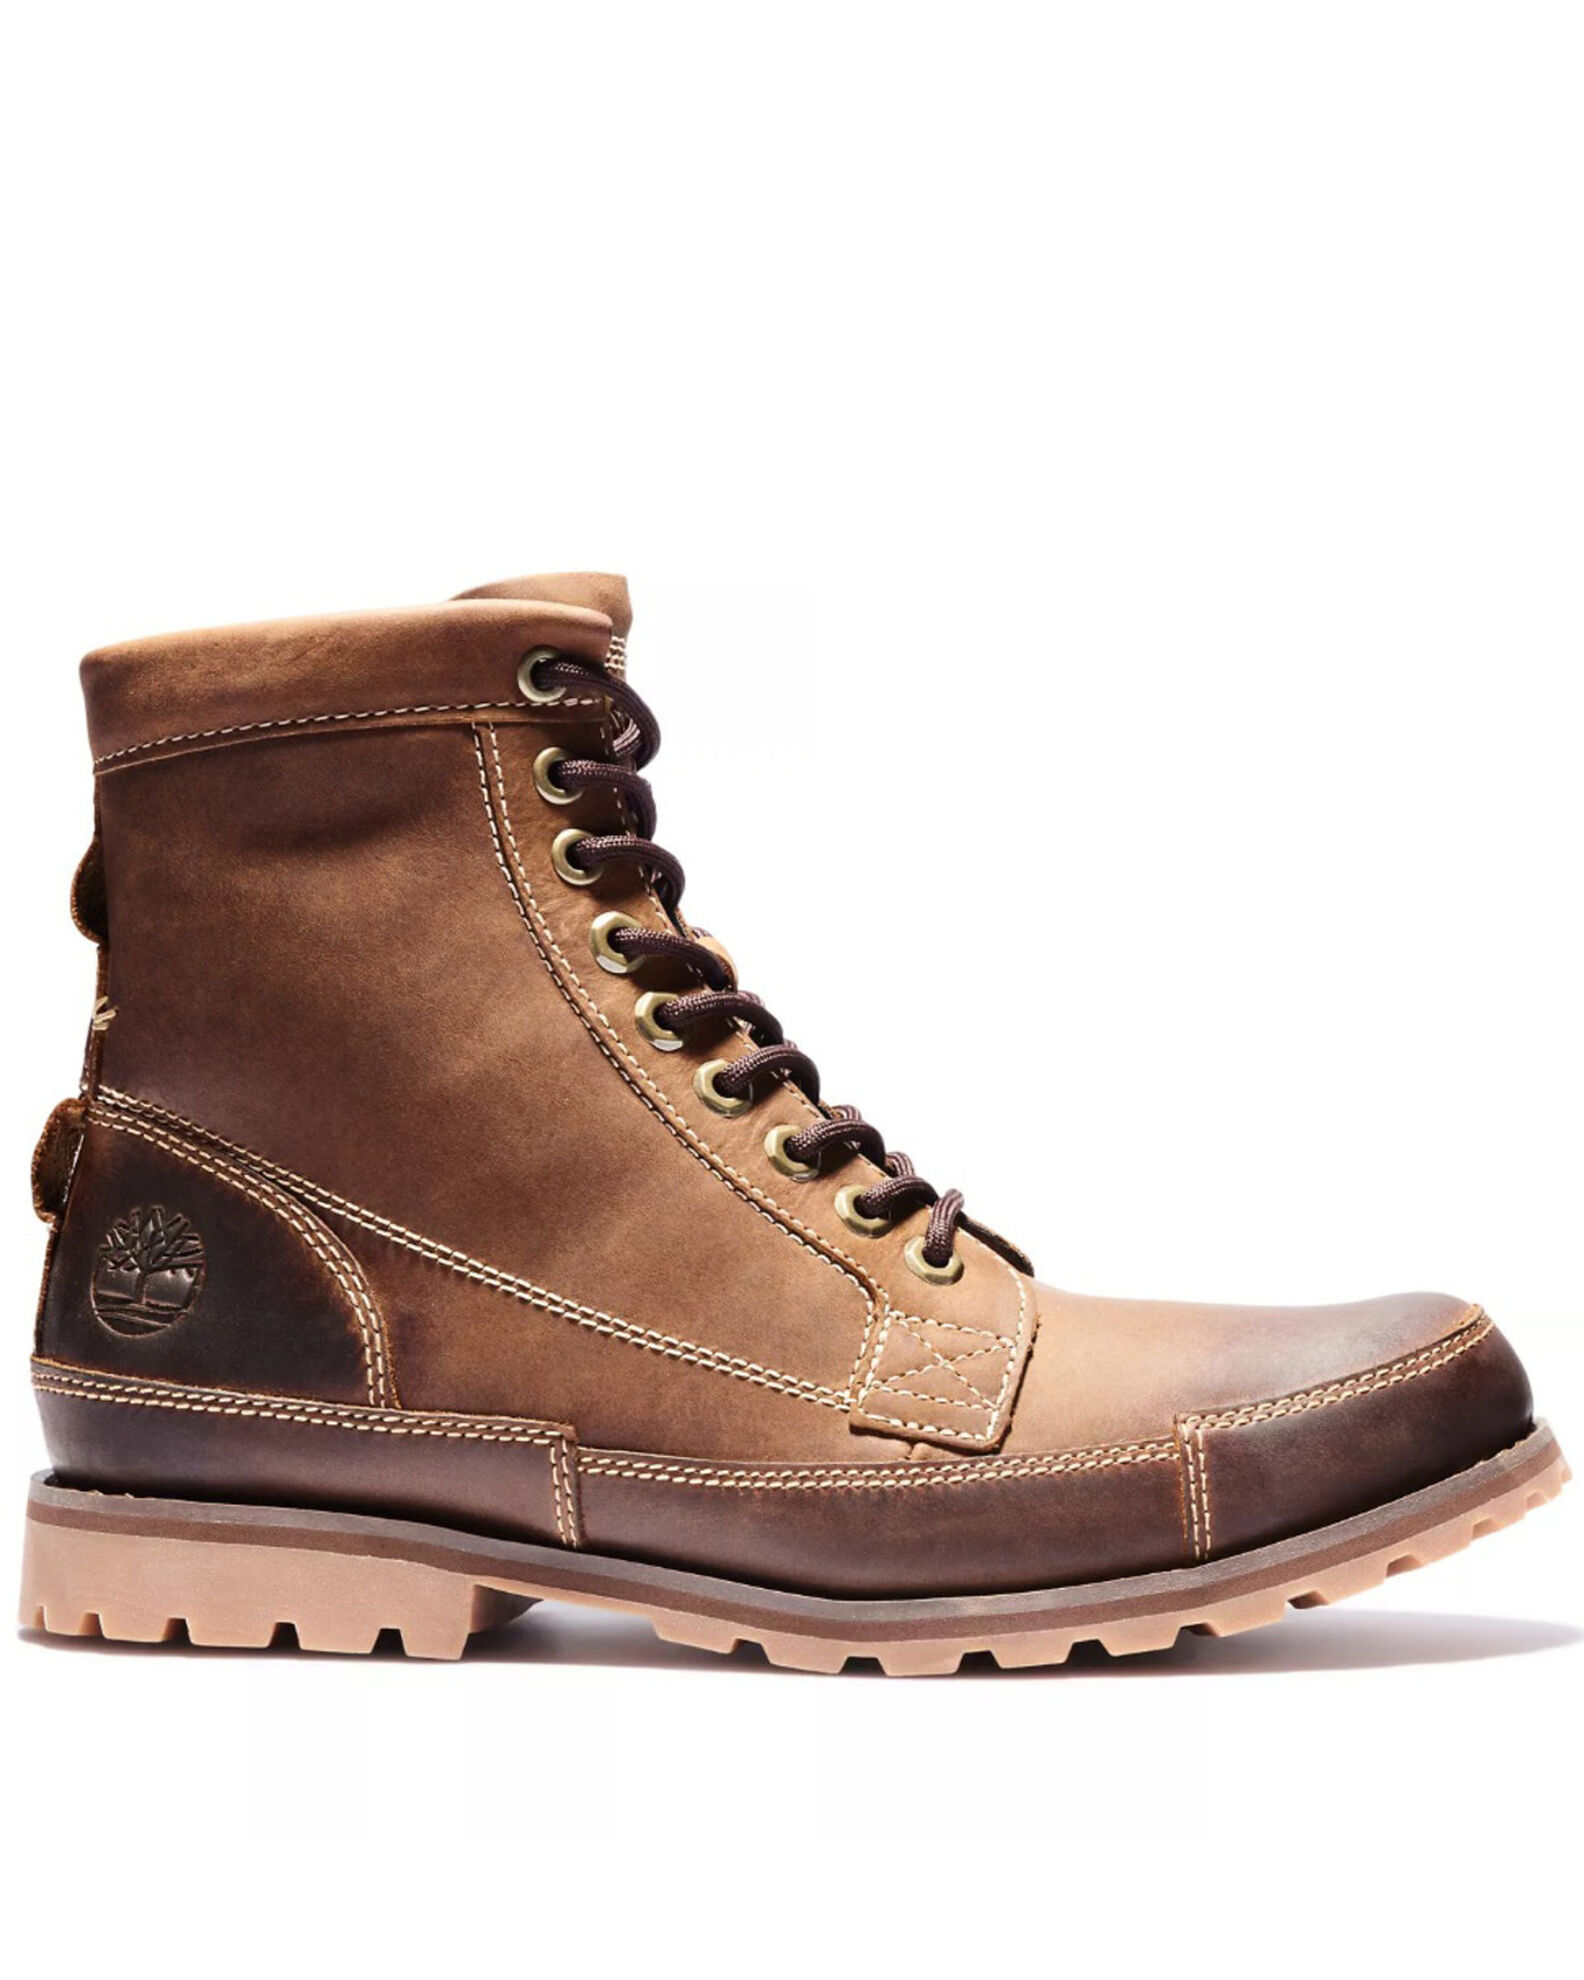 Timberland Men's Earthkeepers Leather Boots - Soft Toe | Boot Barn